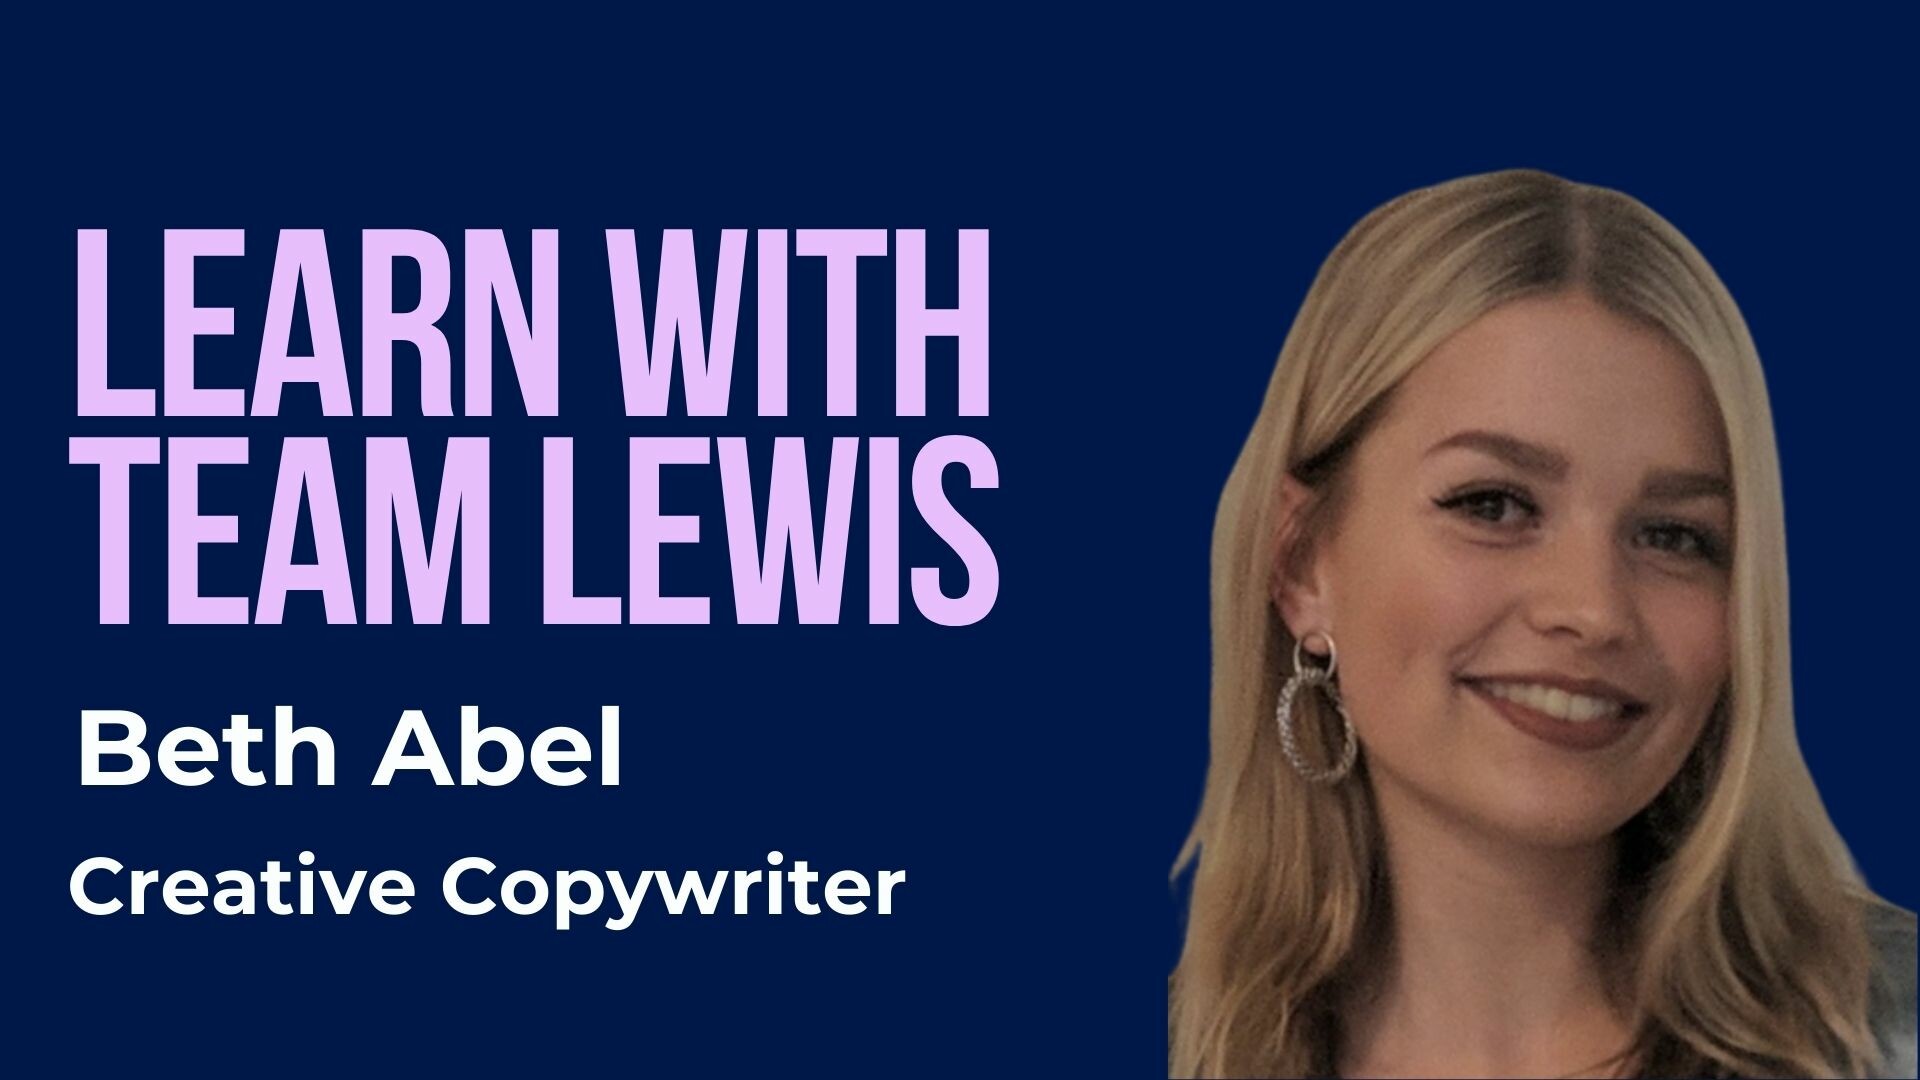 Headshot of Beth Abel, creative copywriter for Learn with team lewis banner 